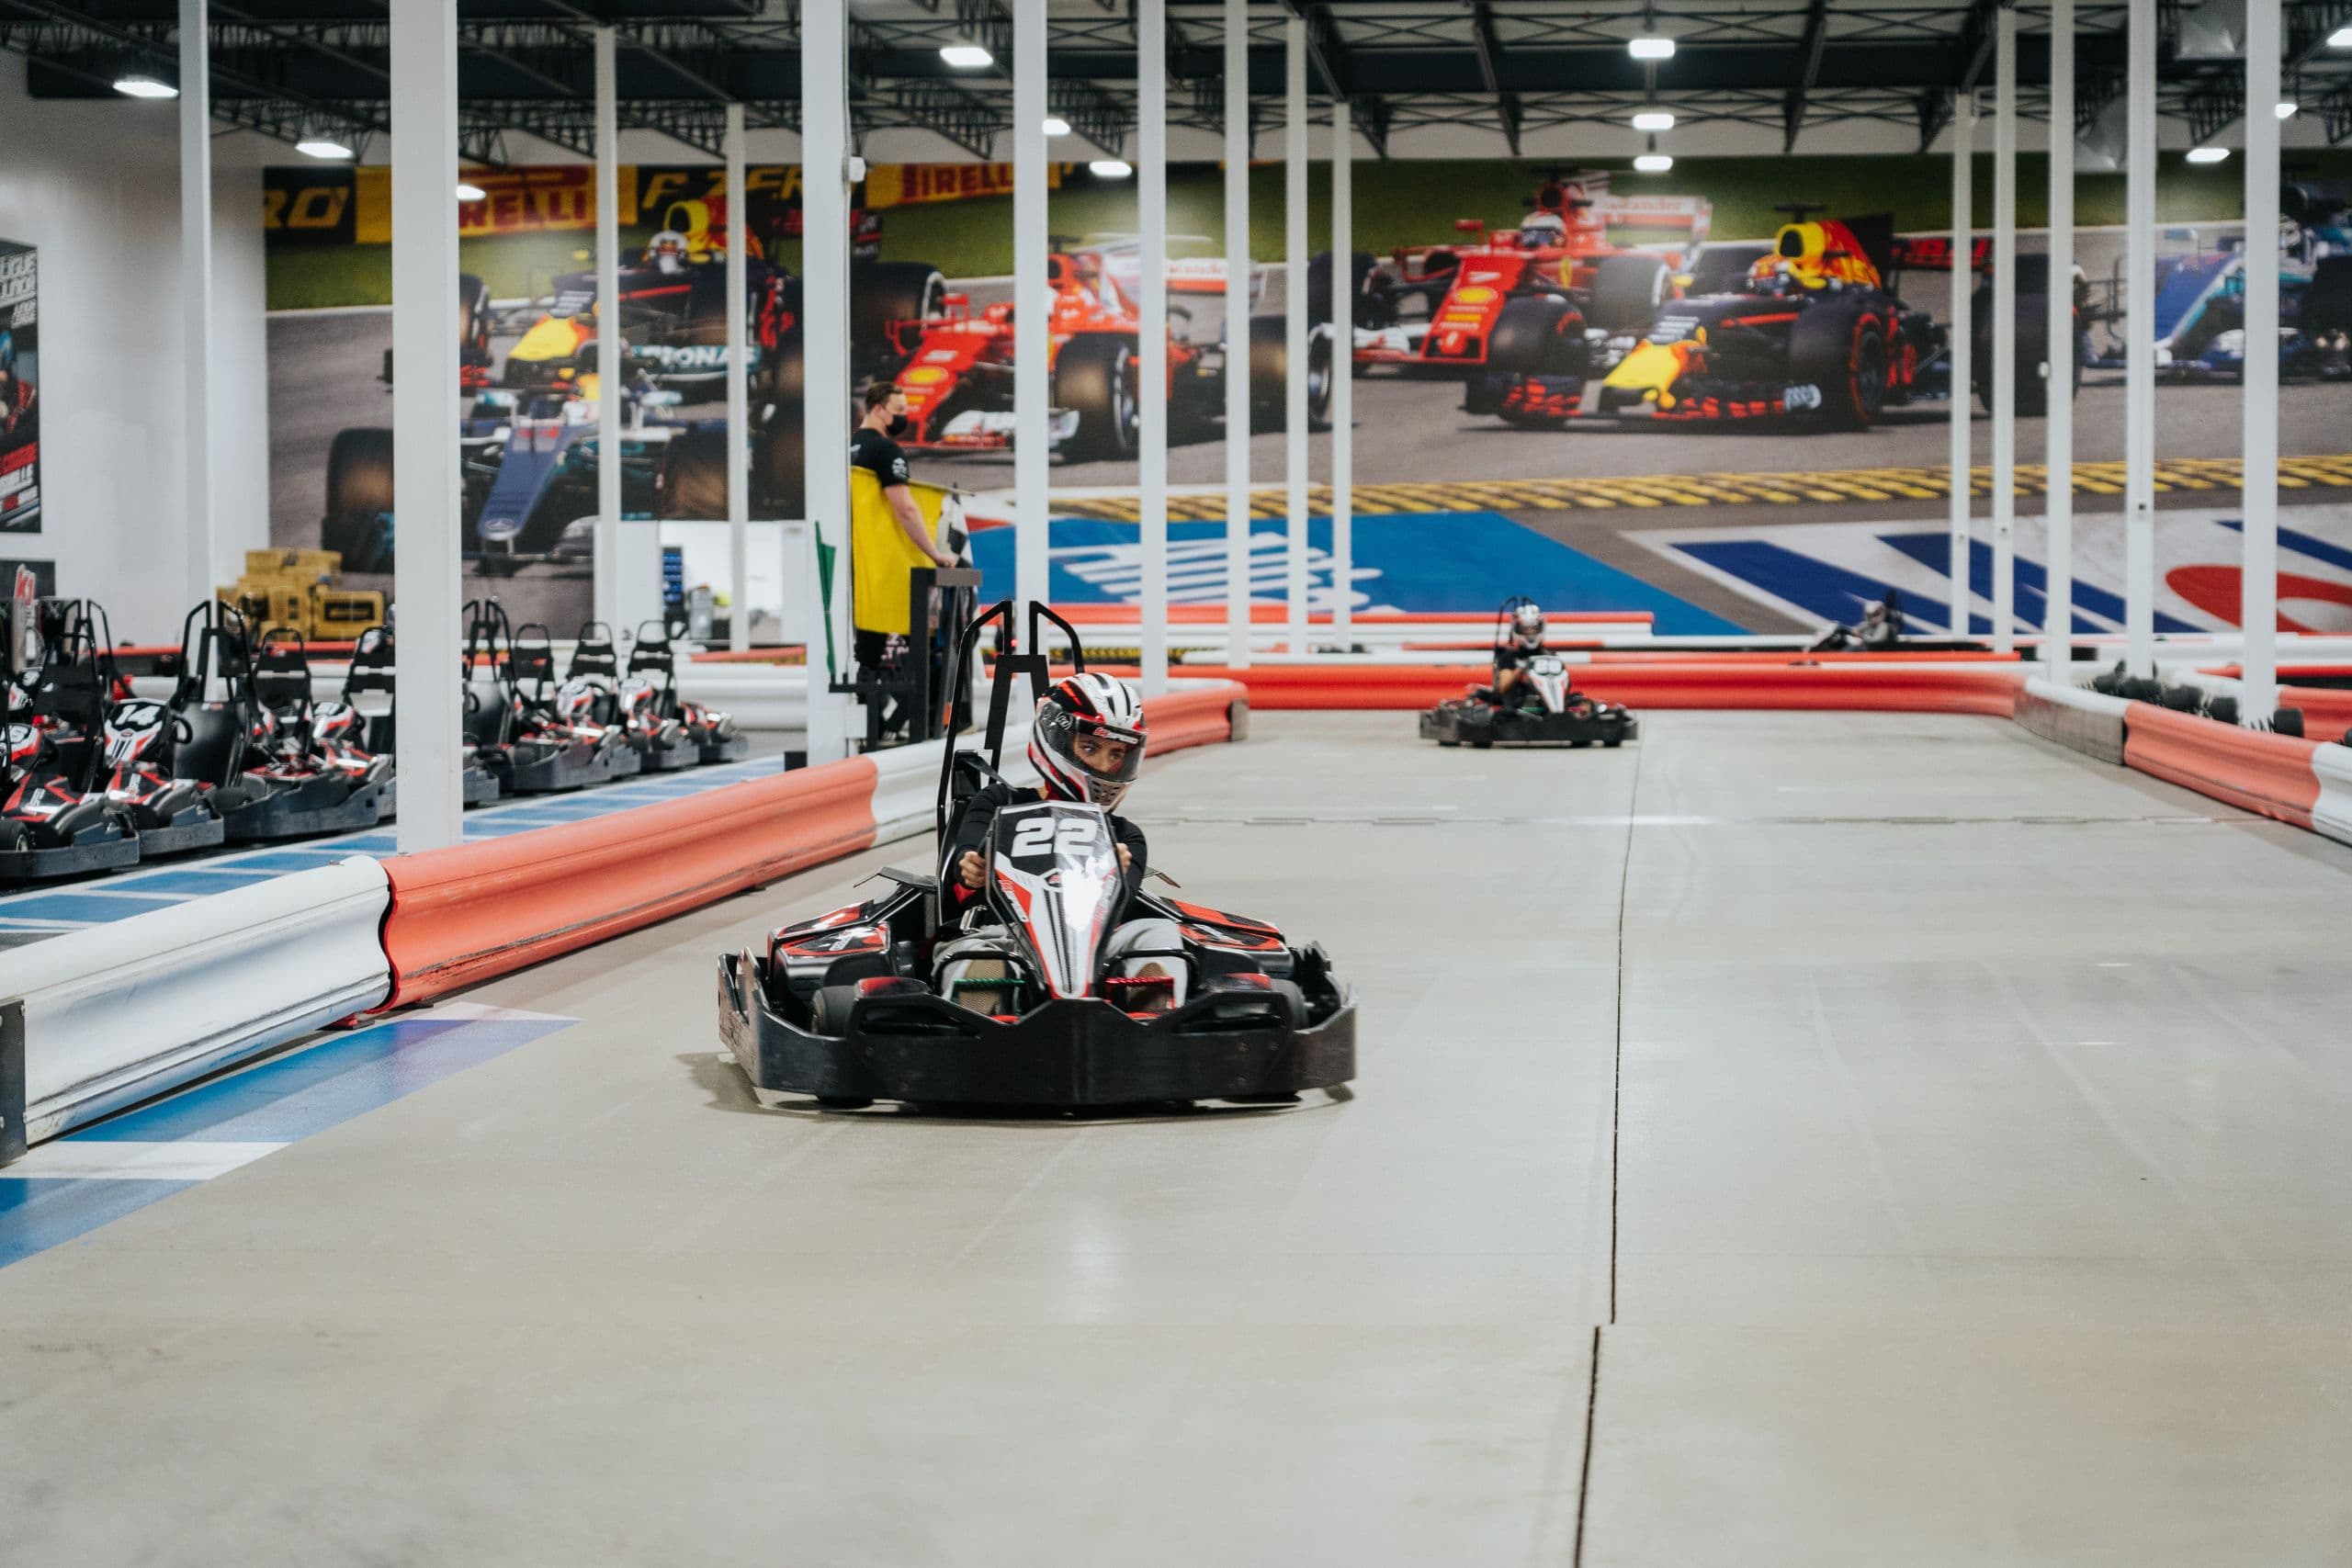 The Thrill of the Race: A Look into Competitive Go-Karting